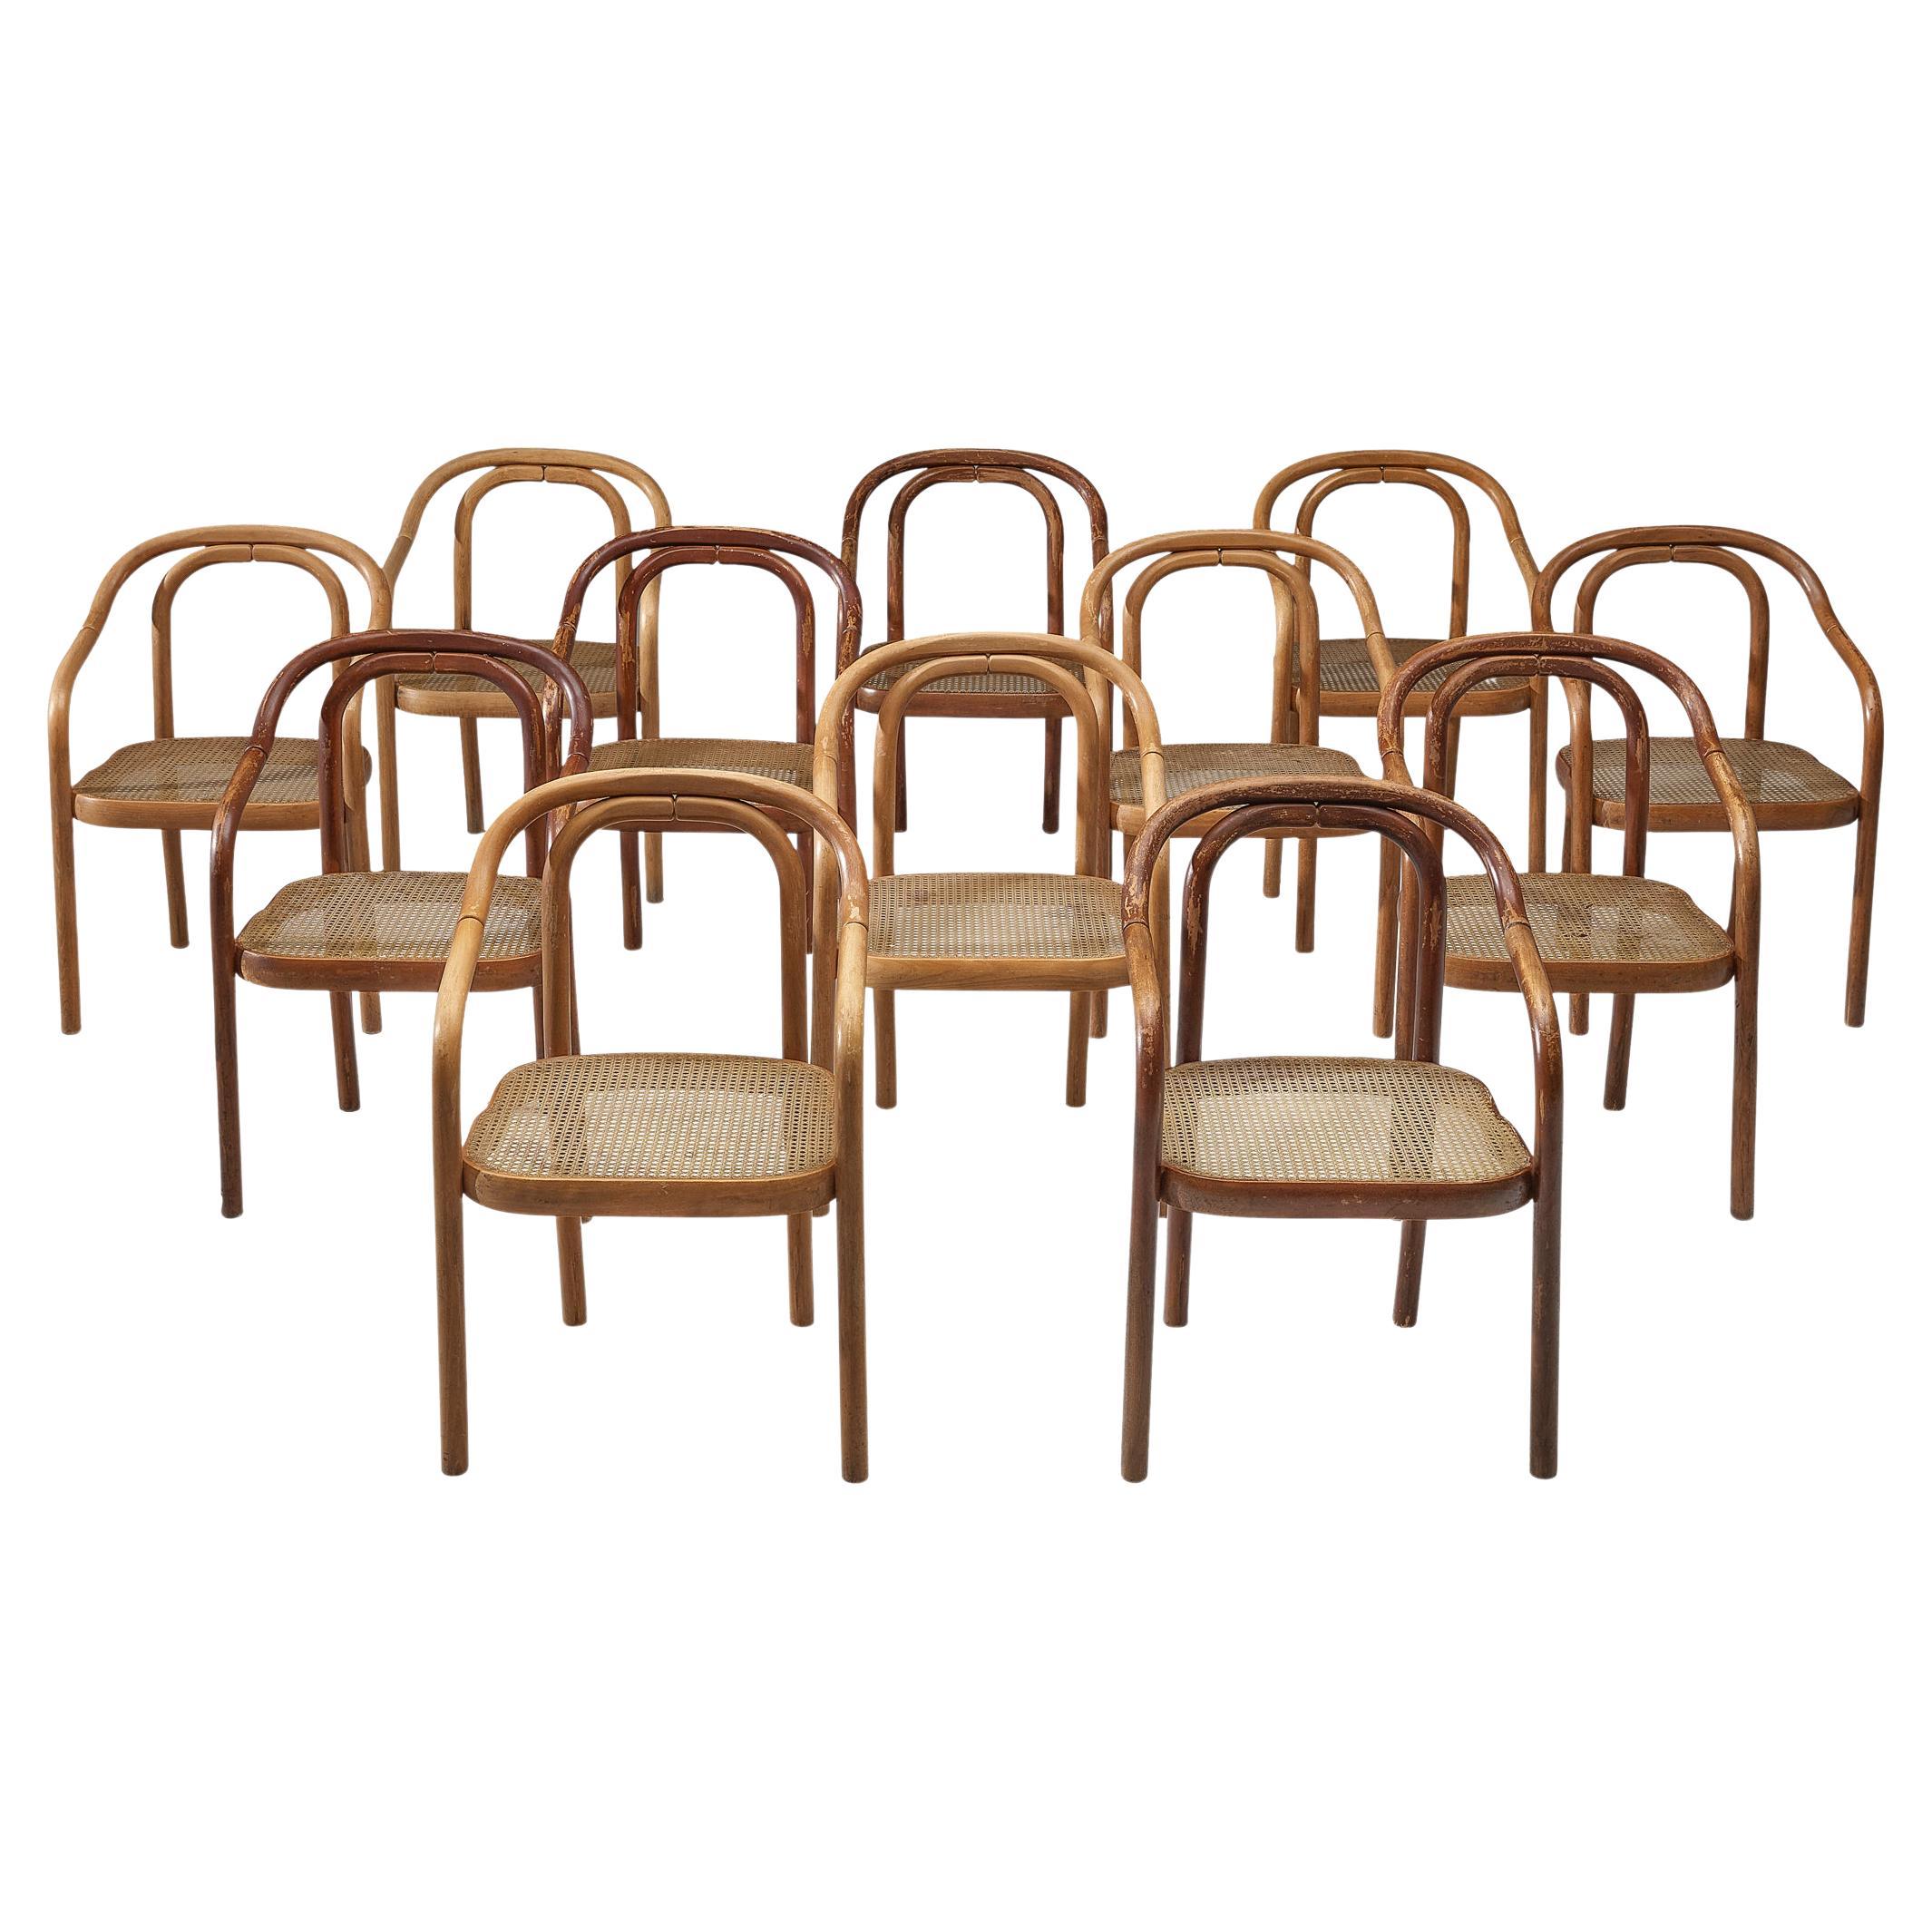 Ton, set of twelve dining chairs, bentwood, plastic webbing, Czech Republic, 1960s

This delightful set of armchairs is characterized by a bentwood frame featuring elegant round corners and clear lines. The engraved rings add a subtle detail to